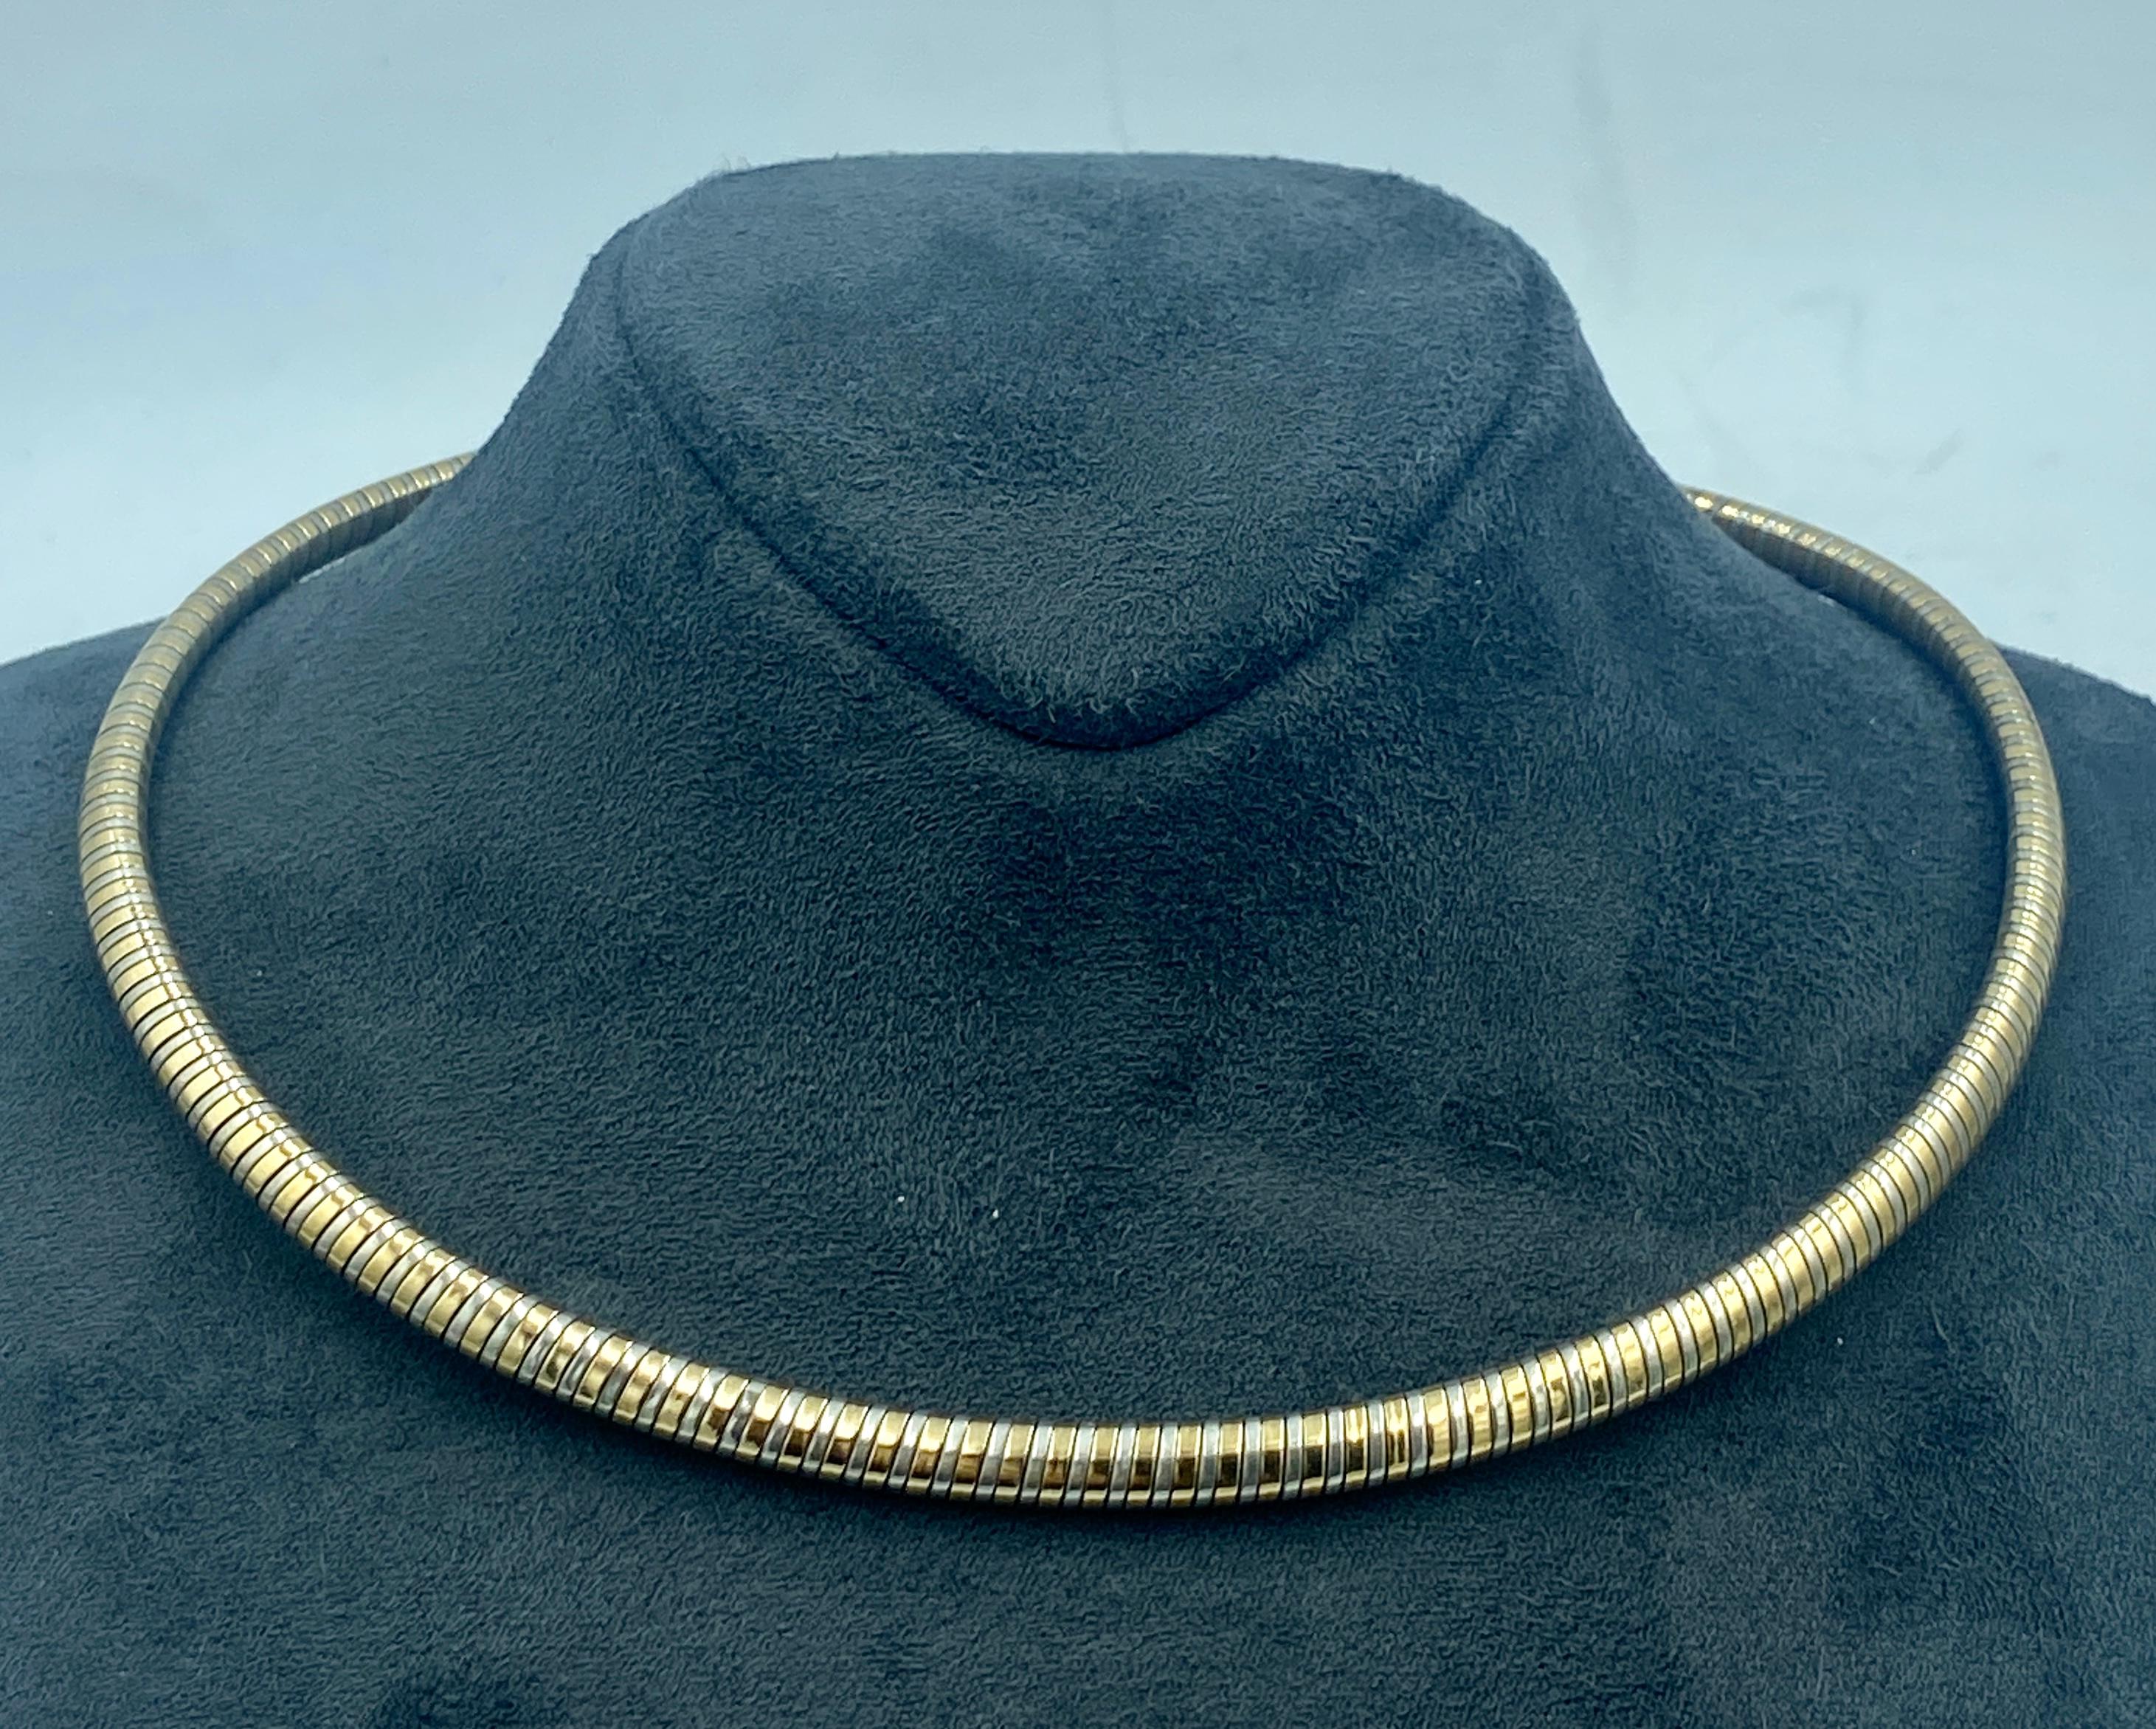 This 1970s Van Cleef & Arpels choker is made of silver and 18k gold and is very flexible. It carries the French assay marks and workshop marks for Lasbleiz, Fournier, Vitielo.